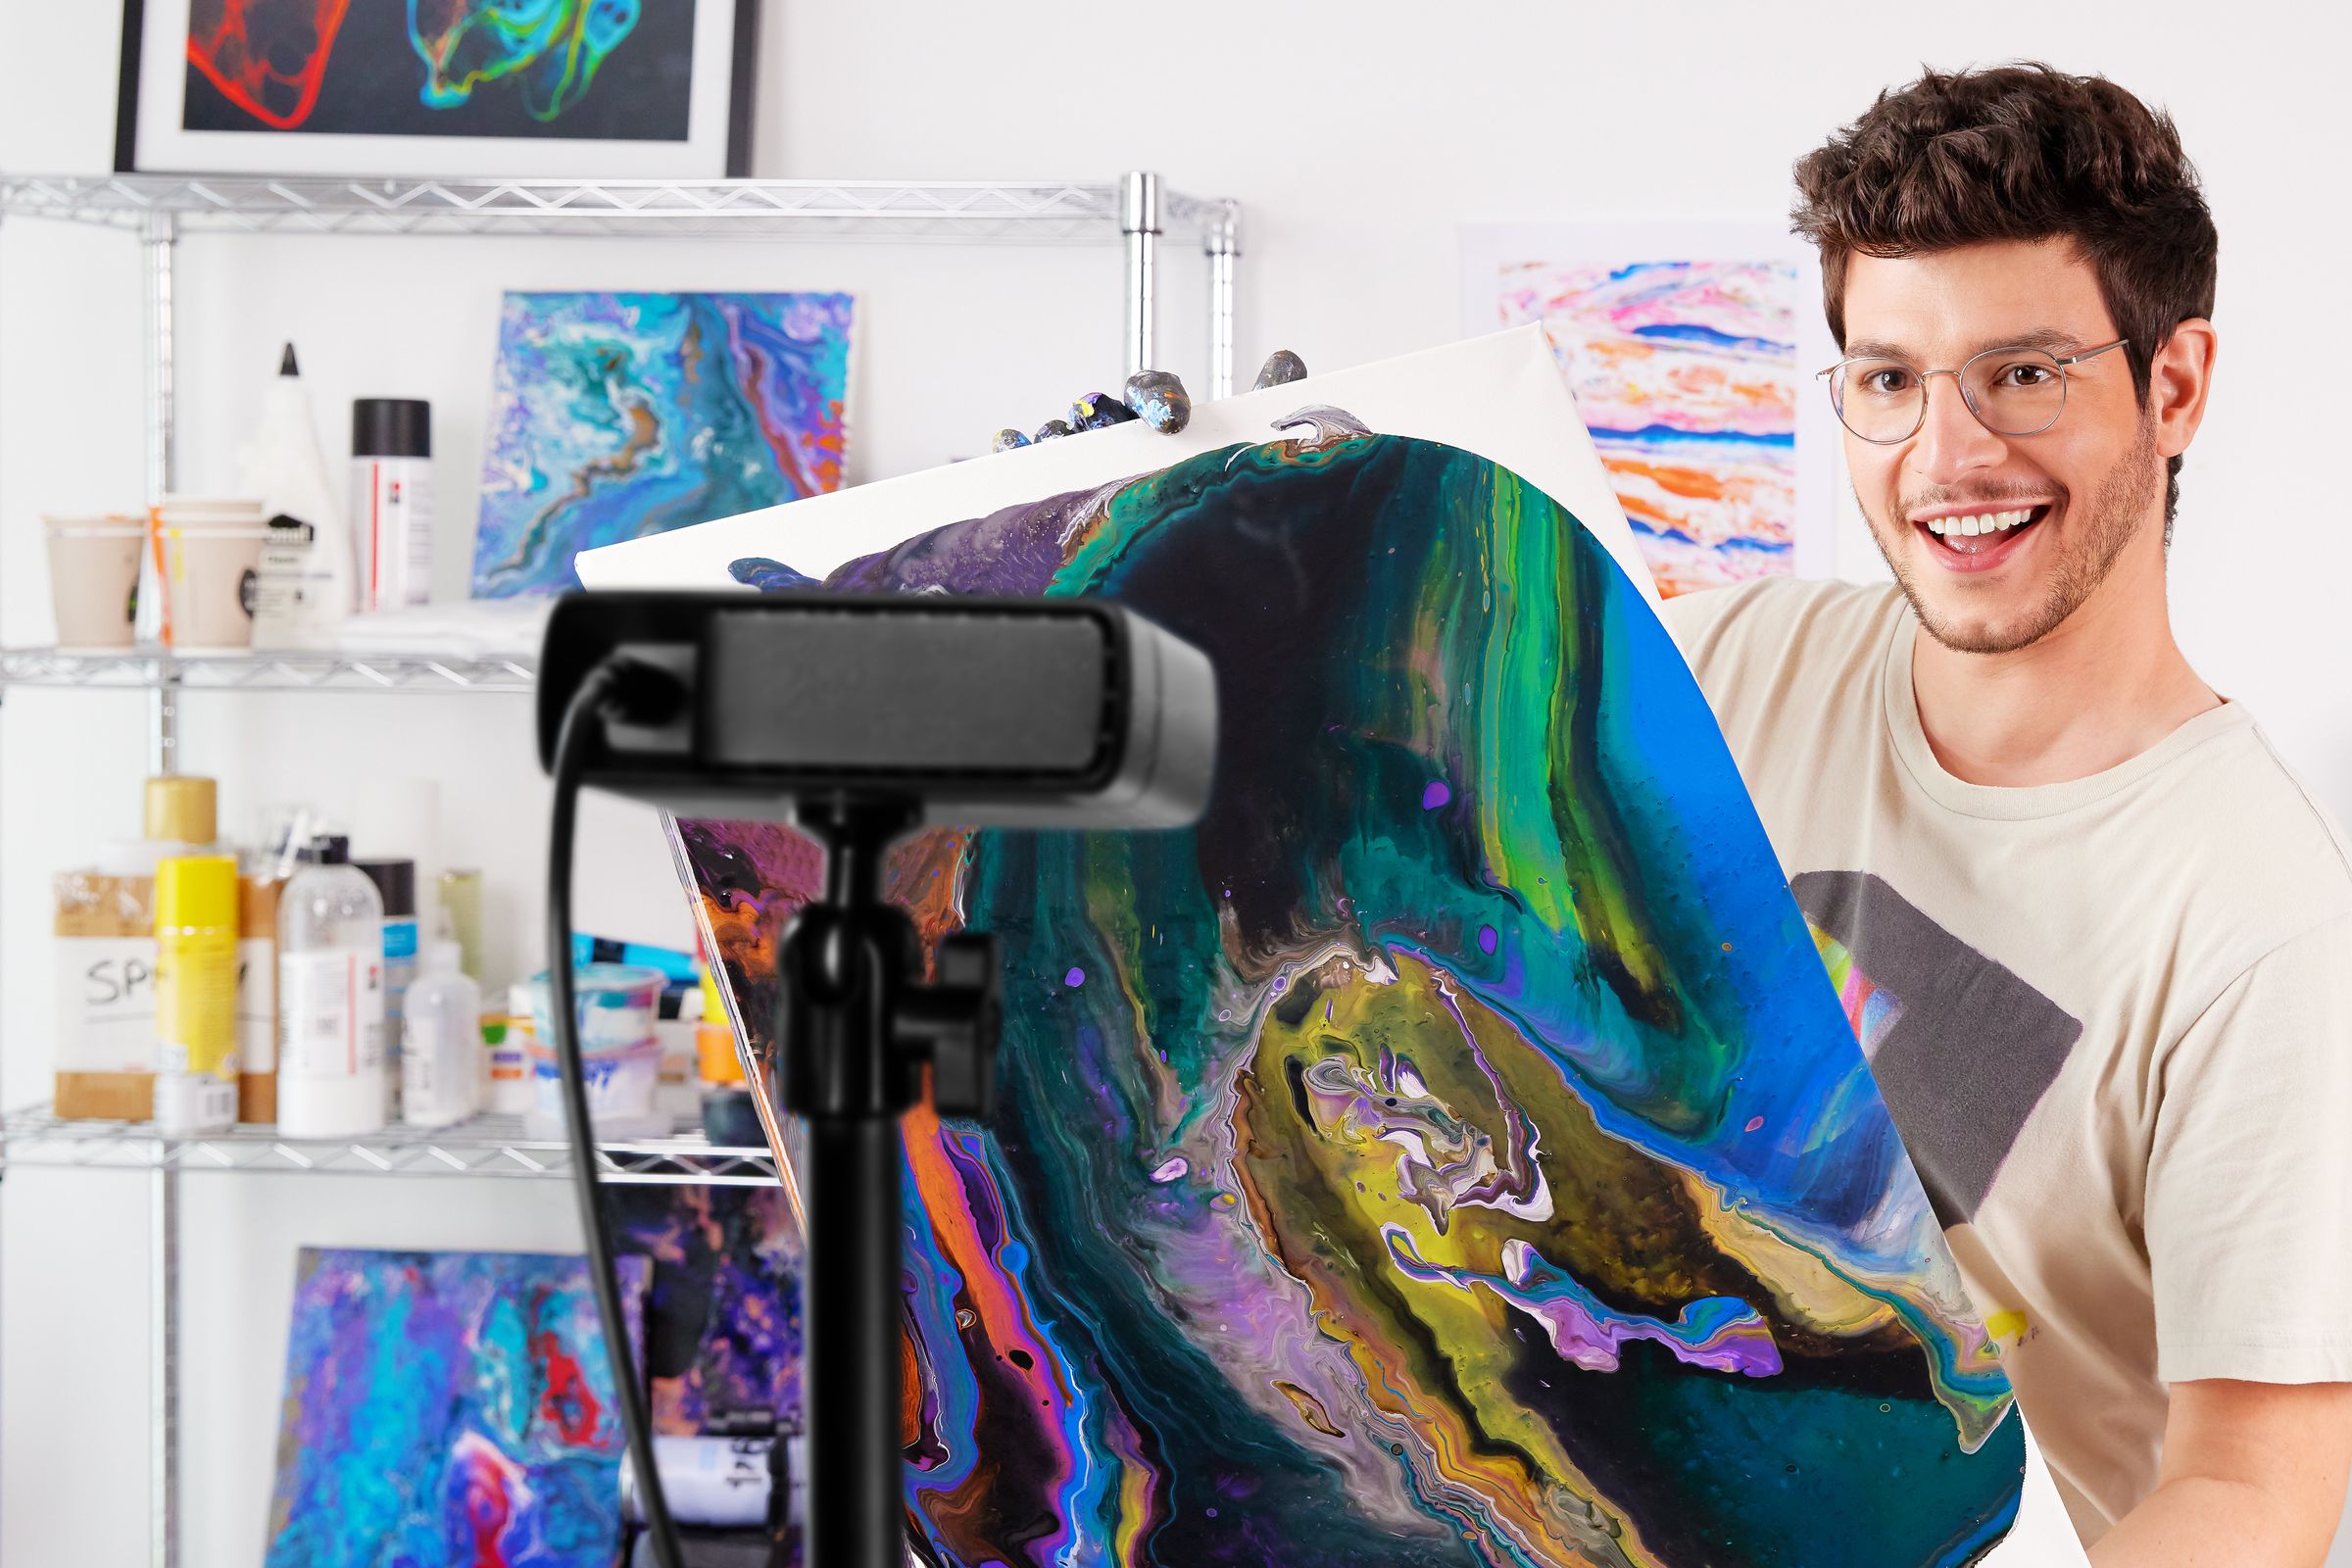 The Elgato Facecam Pro webcam is mounted to a tripod, facing someone who’s showing off their artwork.